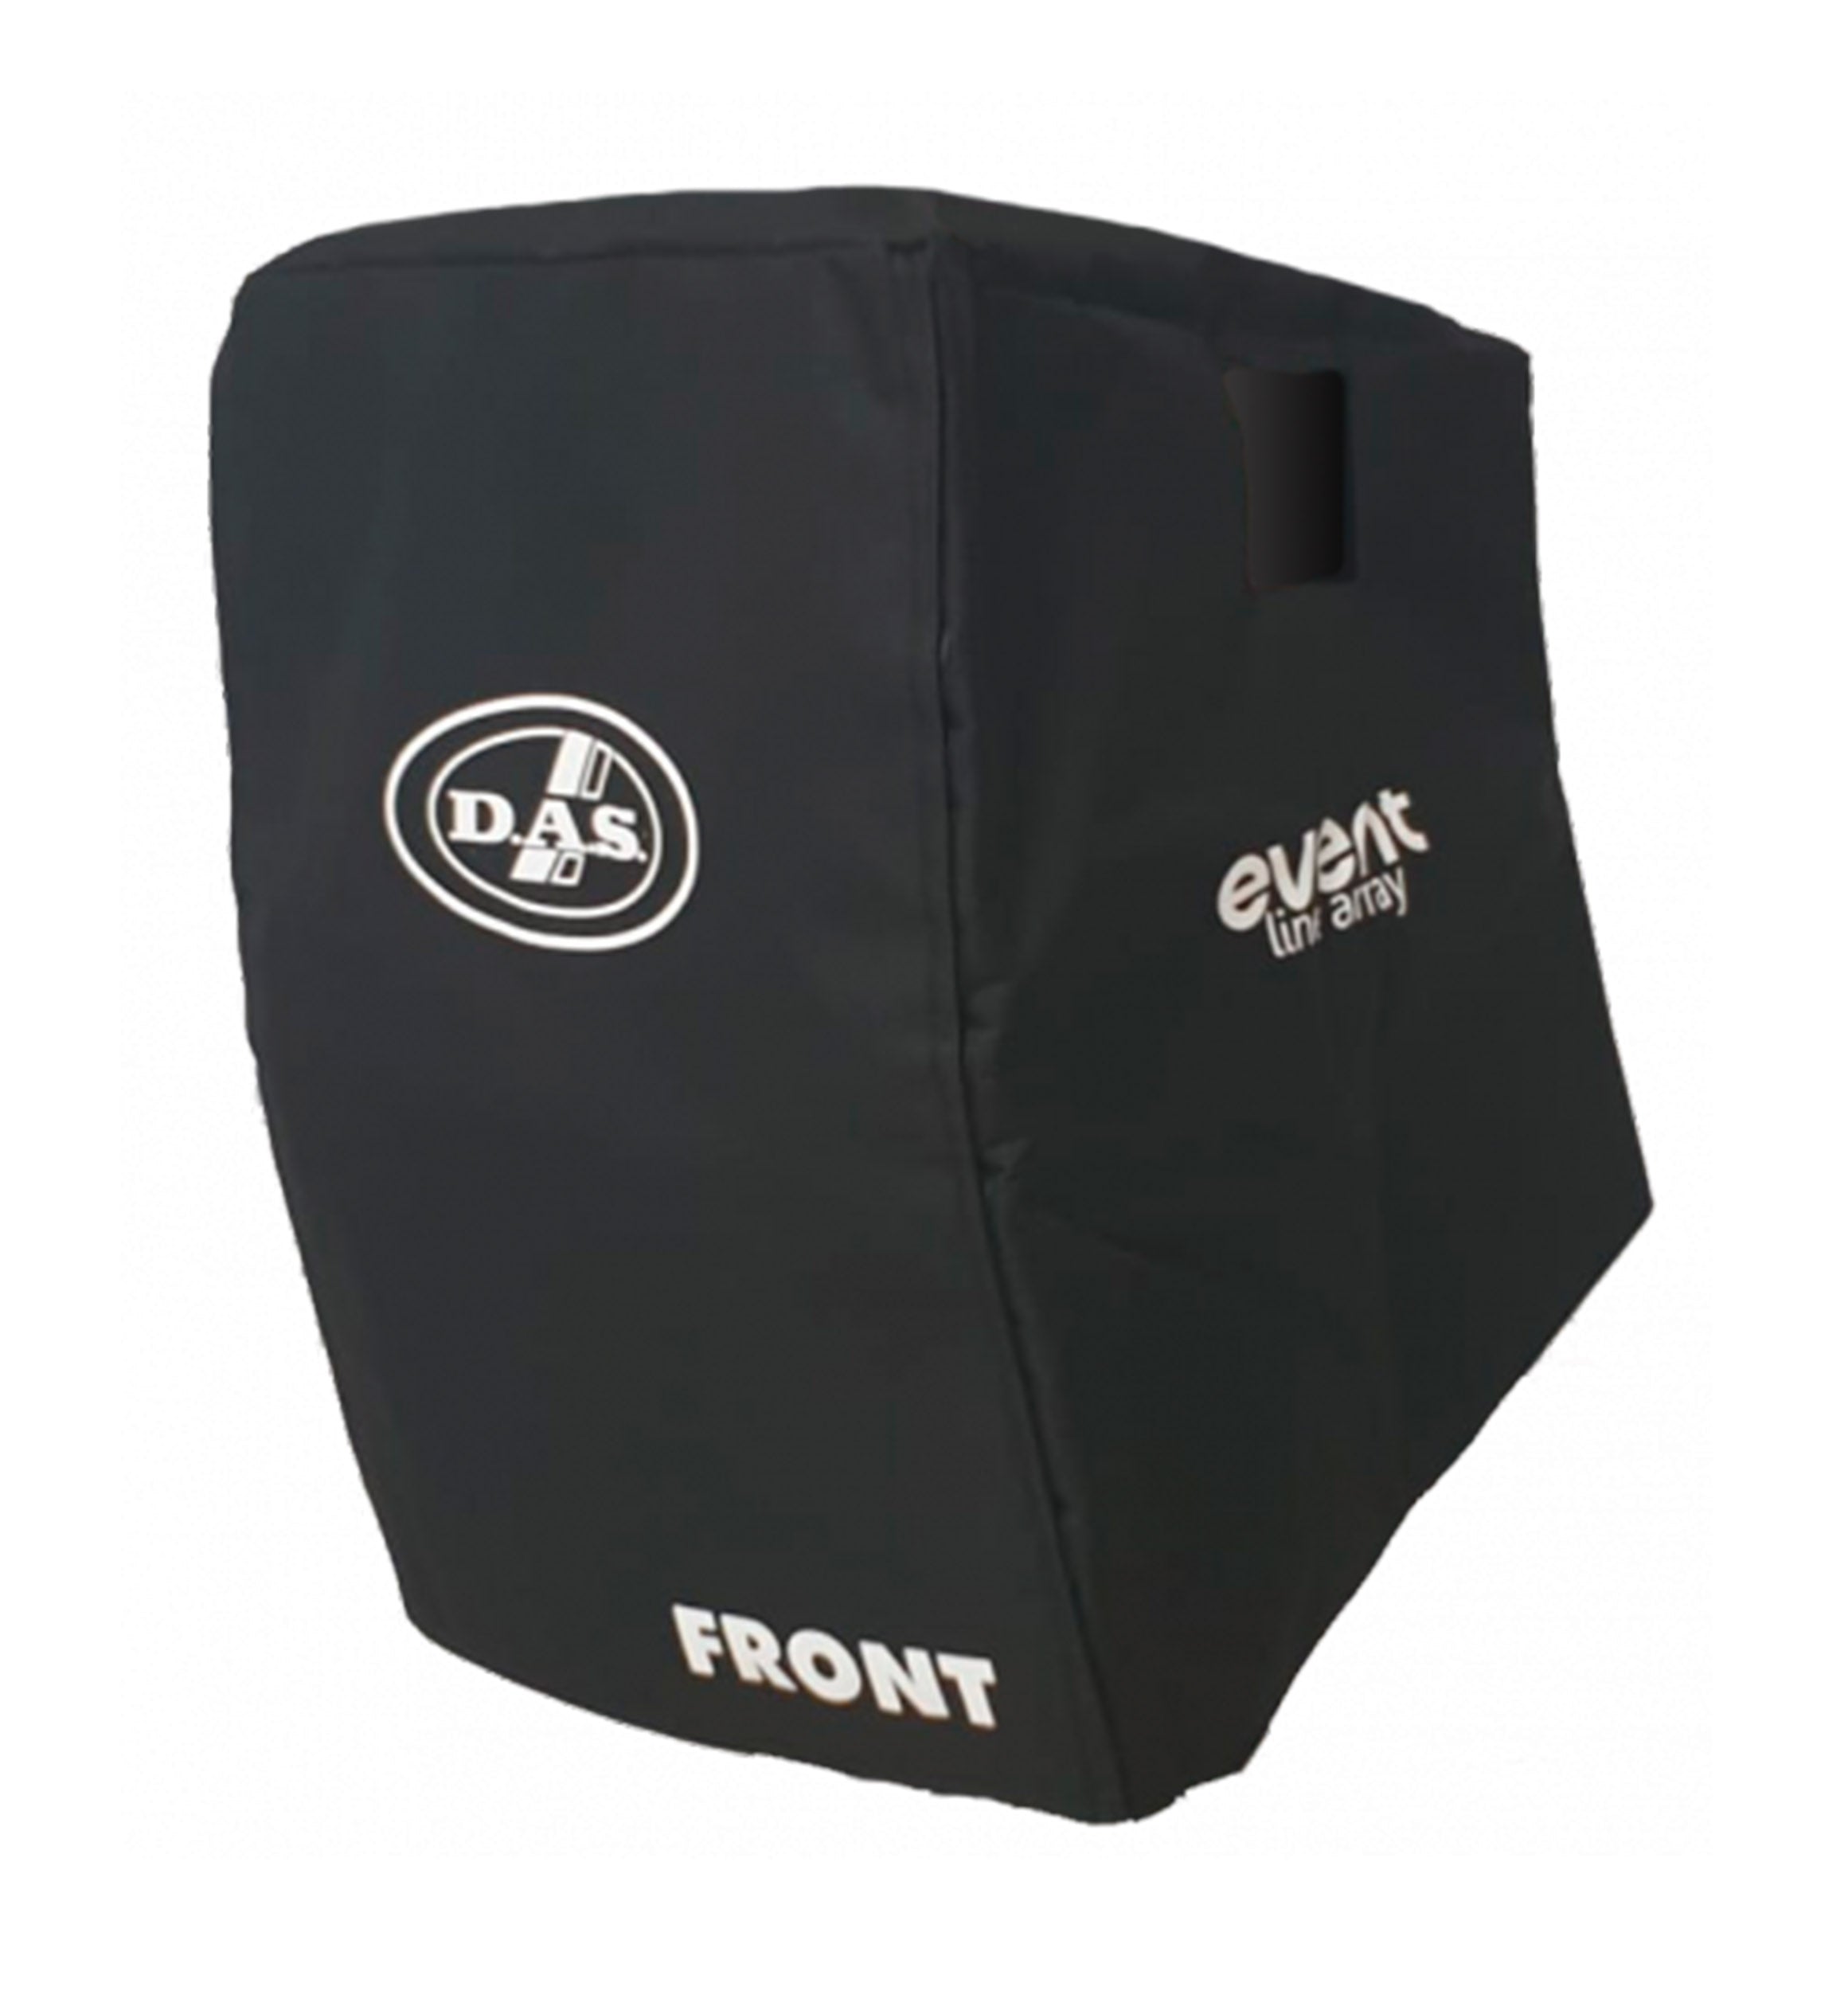 DAS Audio FUN-4-EV28, Protective Transport Cover for 4 Units of EVENT-28A on PL-EV28S - Black by DAS Audio